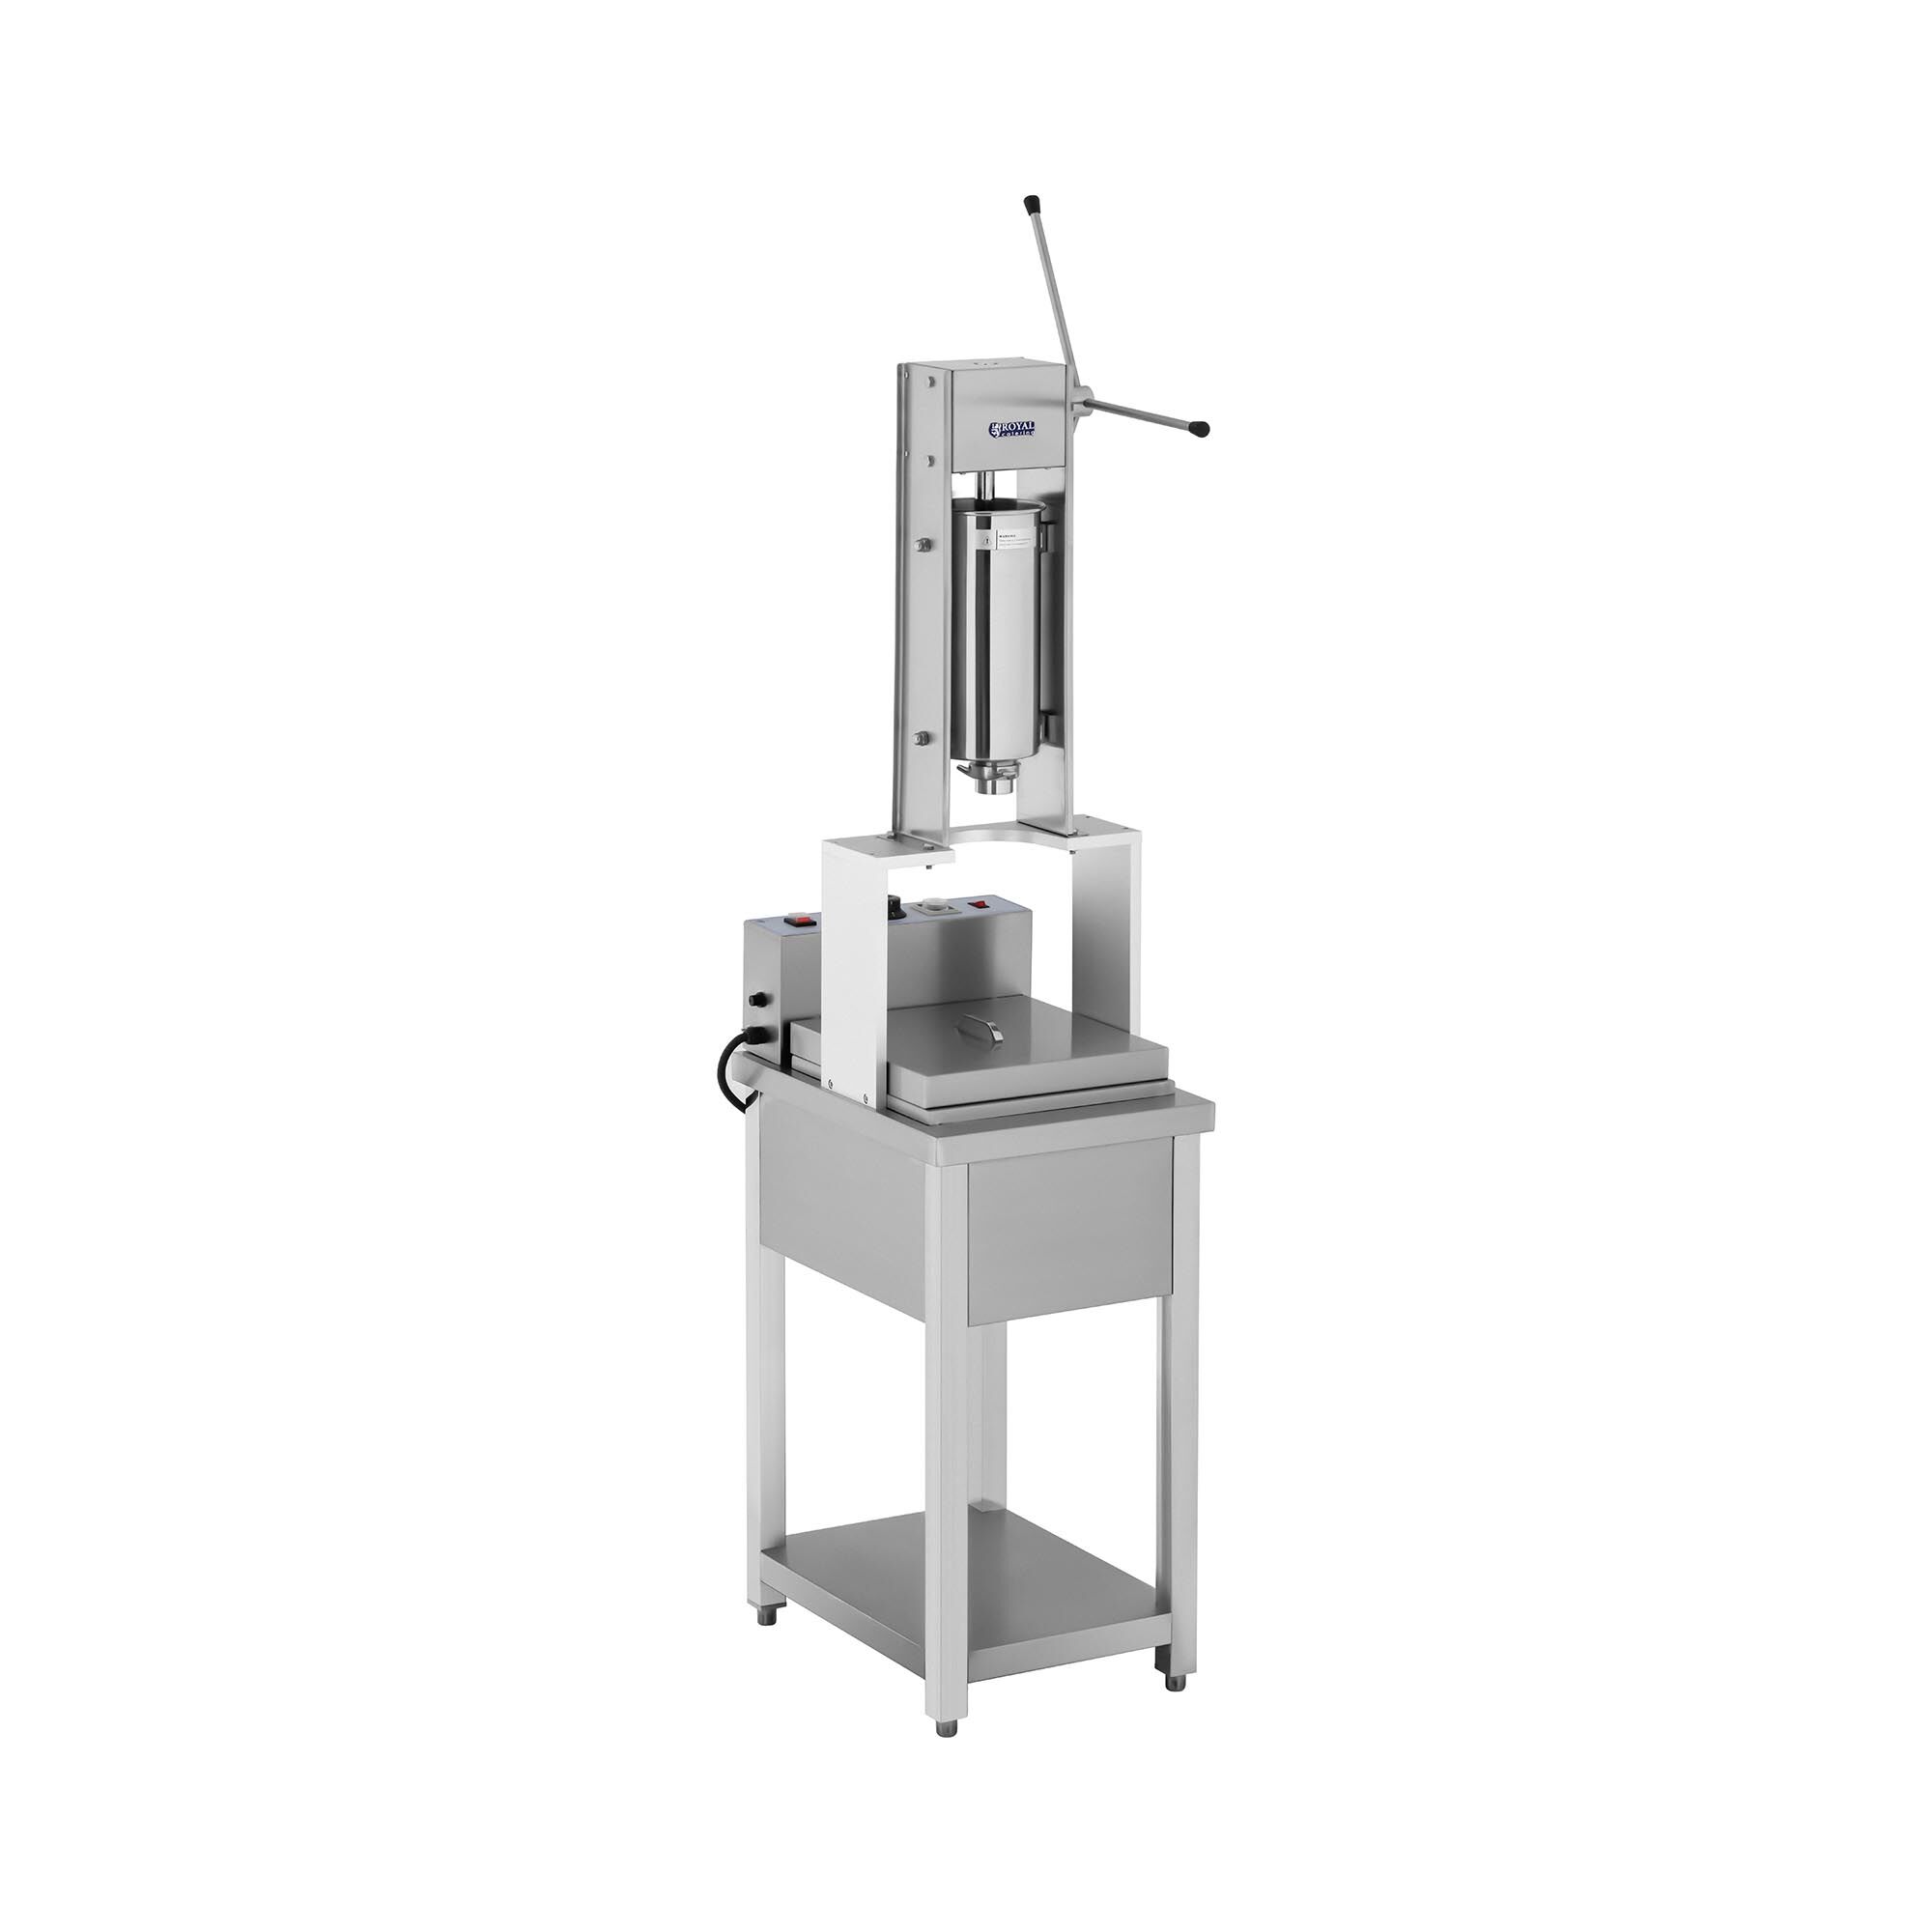 Royal Catering Churro Maschine - 5 L - Royal Catering - 5000 W